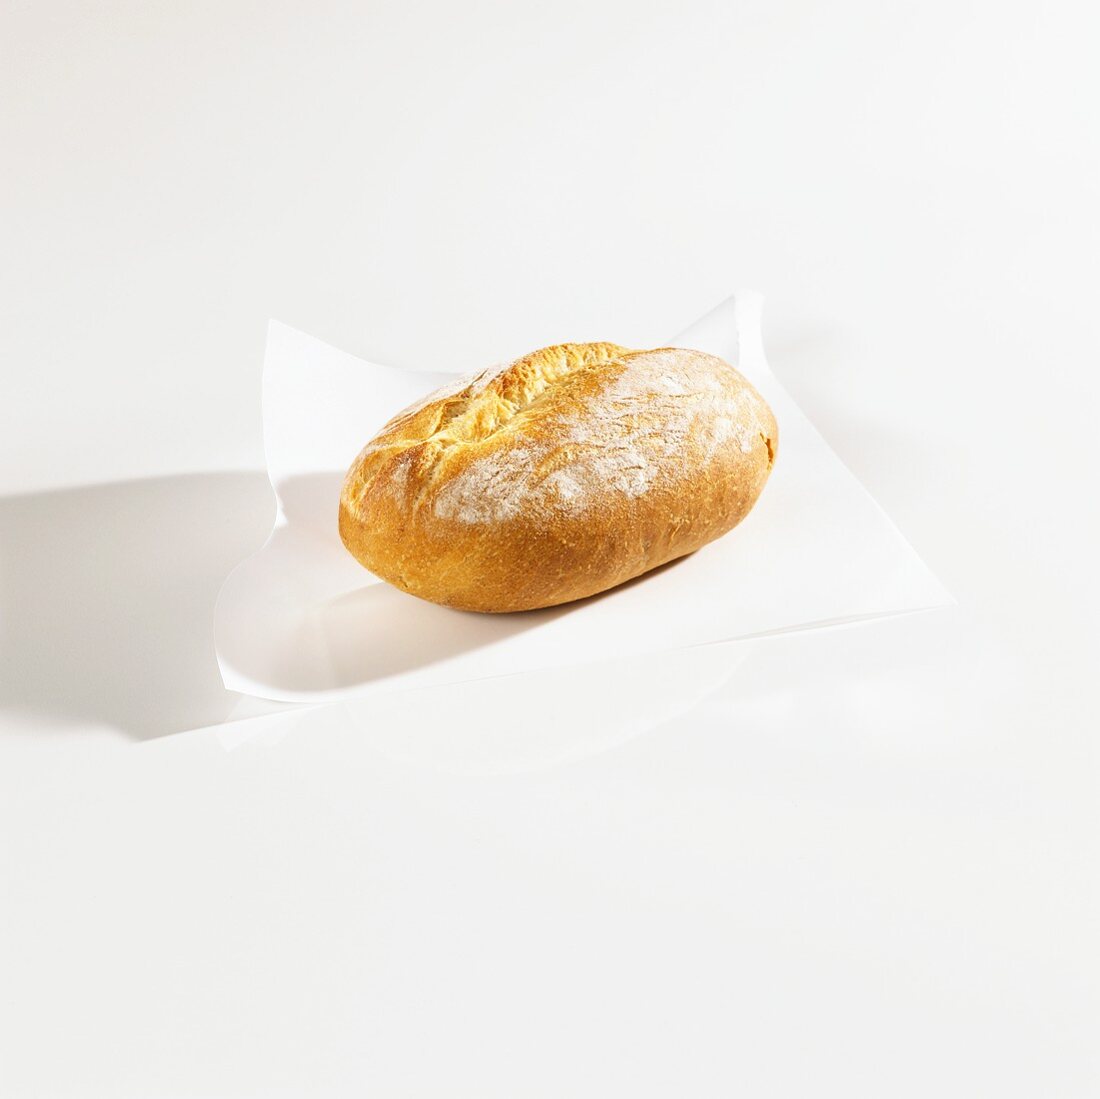 A bread roll on greaseproof paper